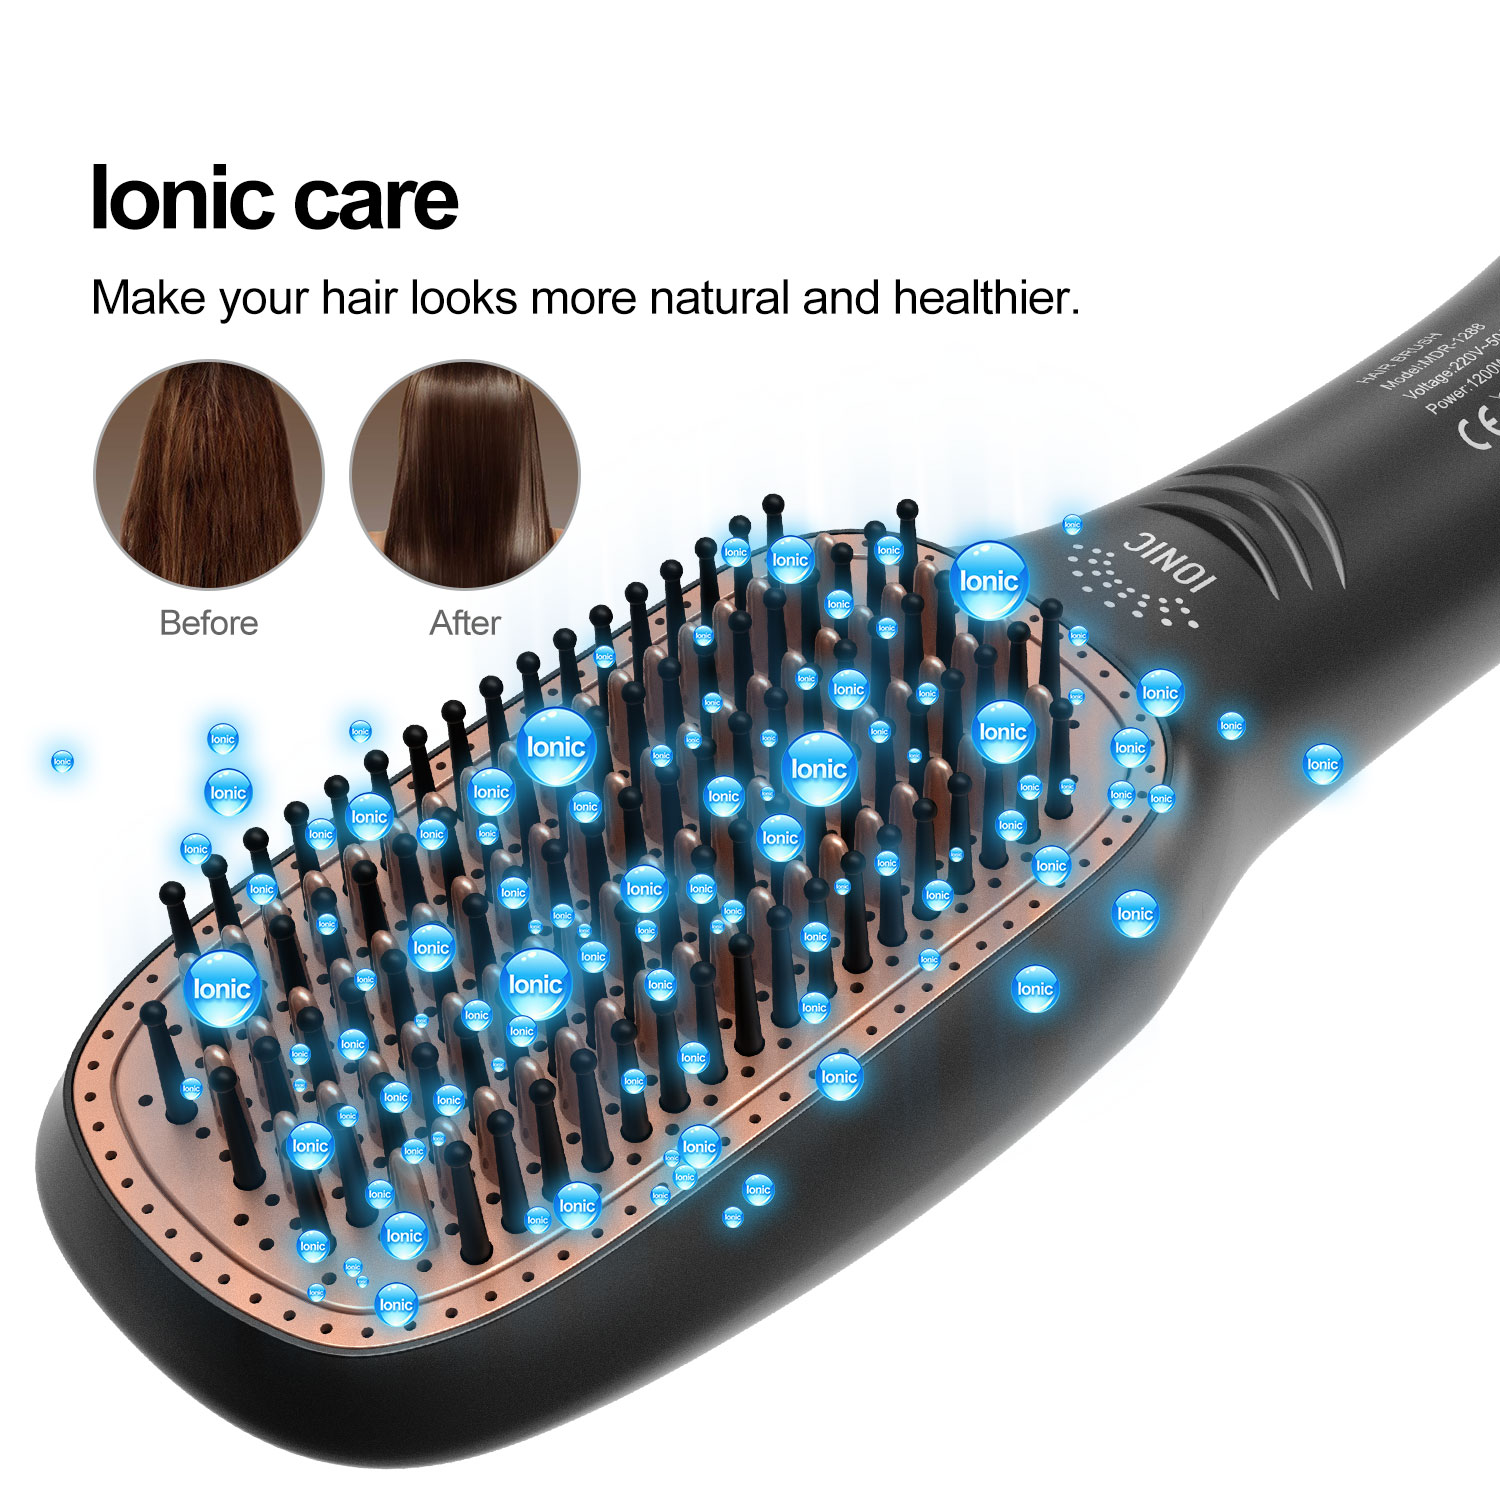 New laser light technology available to treat hair loss | WJAR